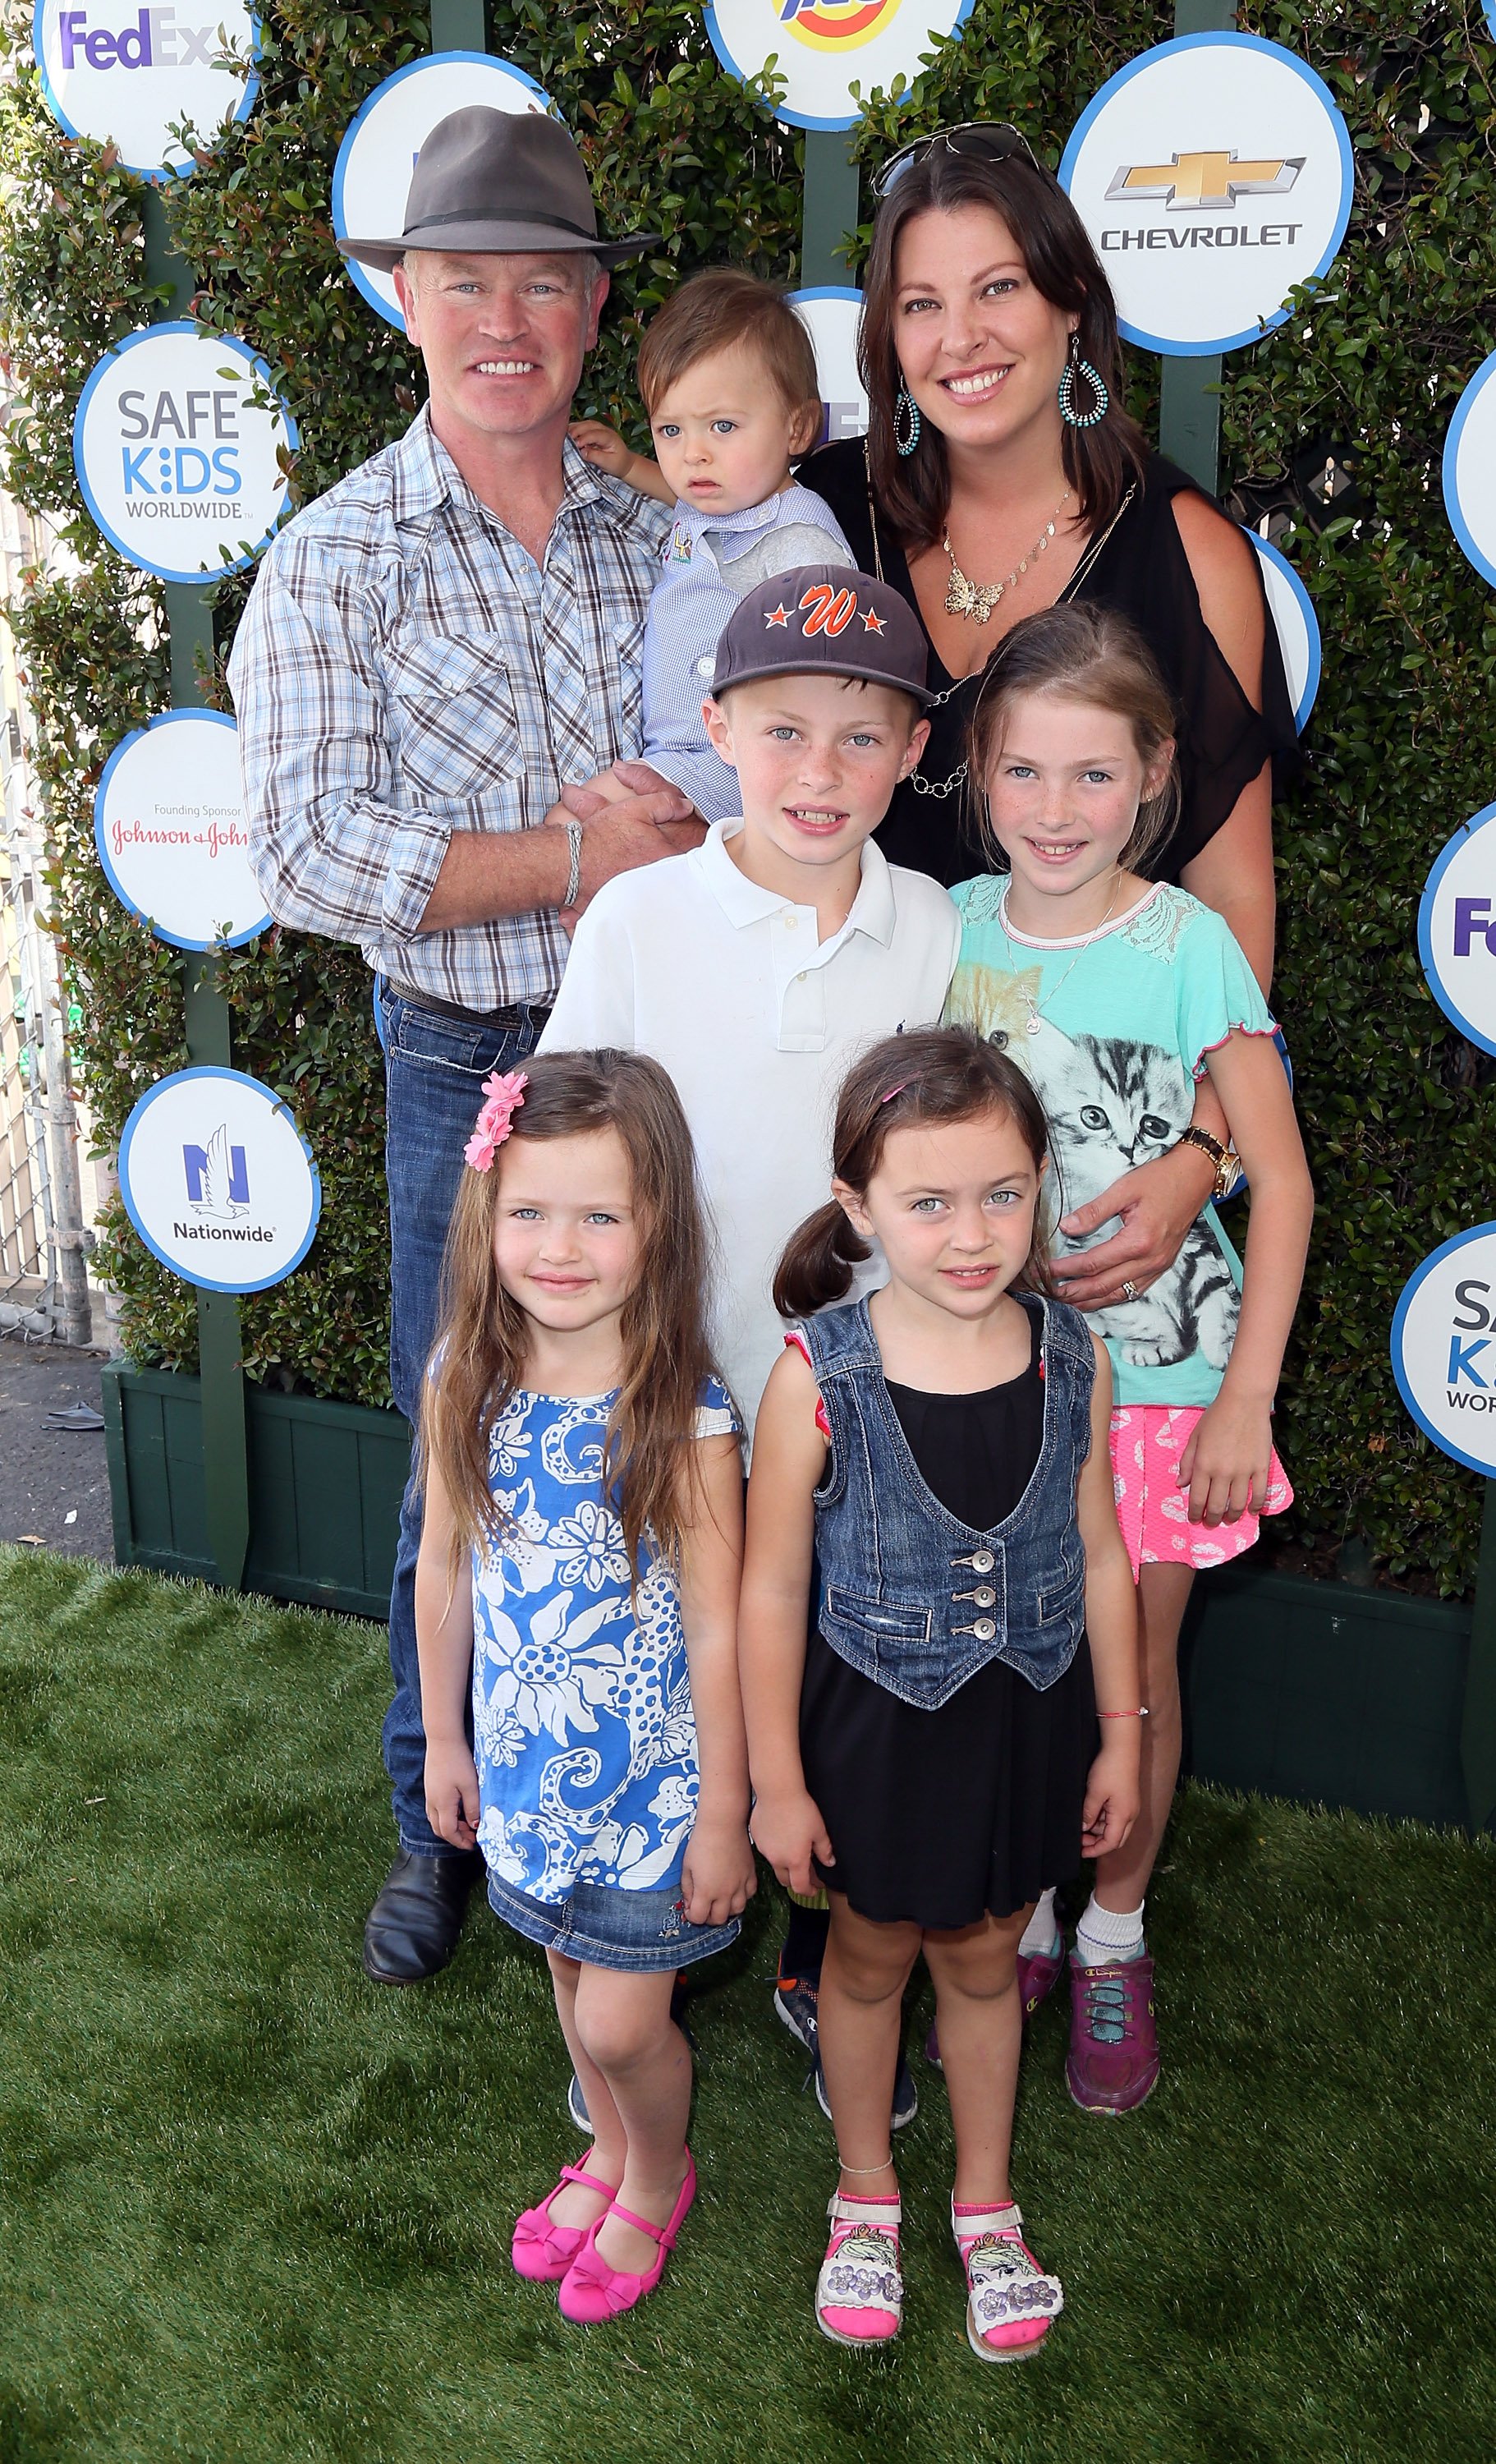 Actor Neal McDonough, wife Ruve McDonough and children at Safe Kids Day presented by Nationwide at The Lot on April 26, 2015 in West Hollywood, California. | Source: Getty Images